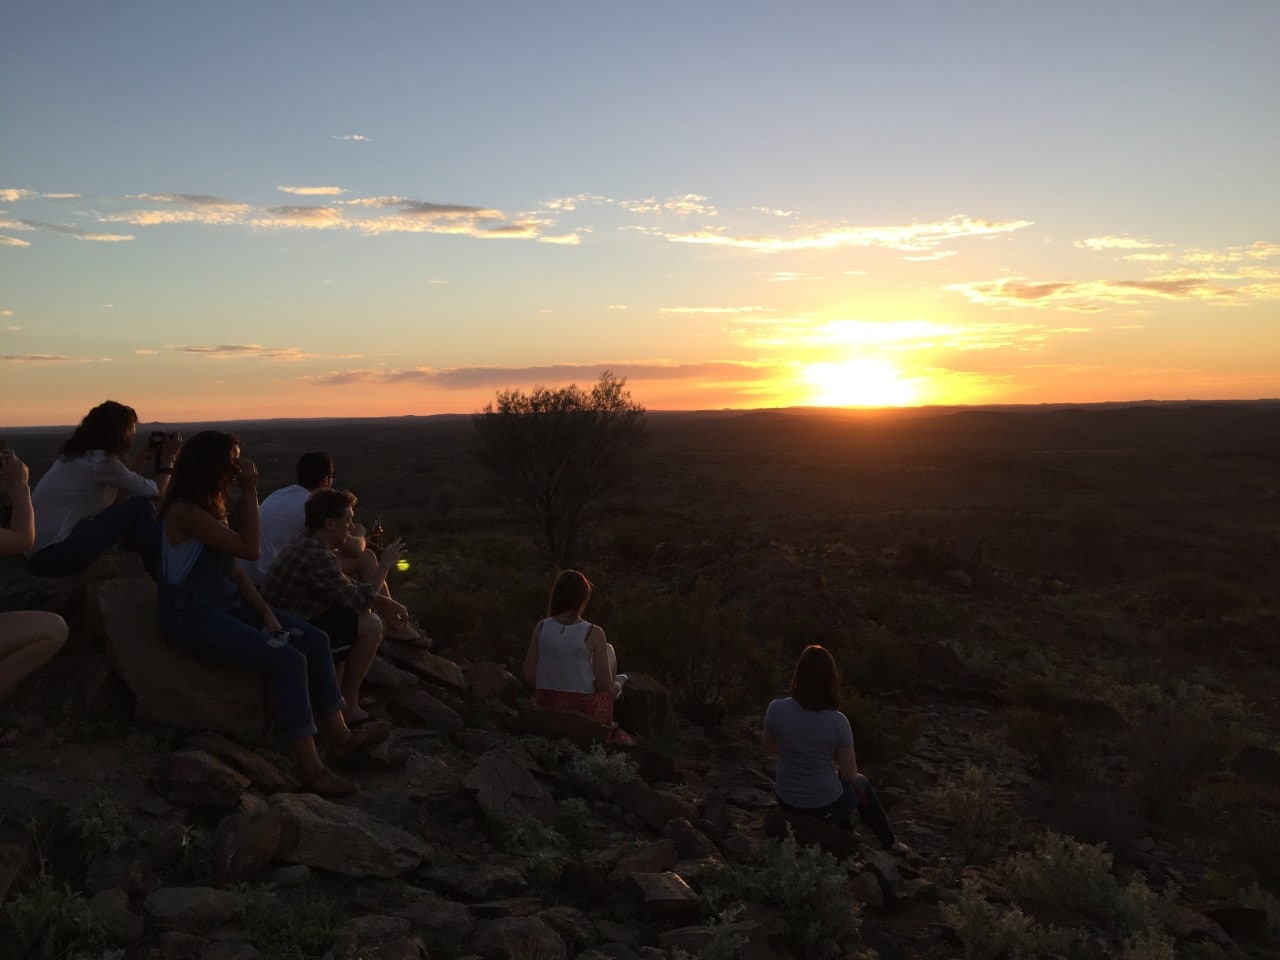 Students watching a sunset